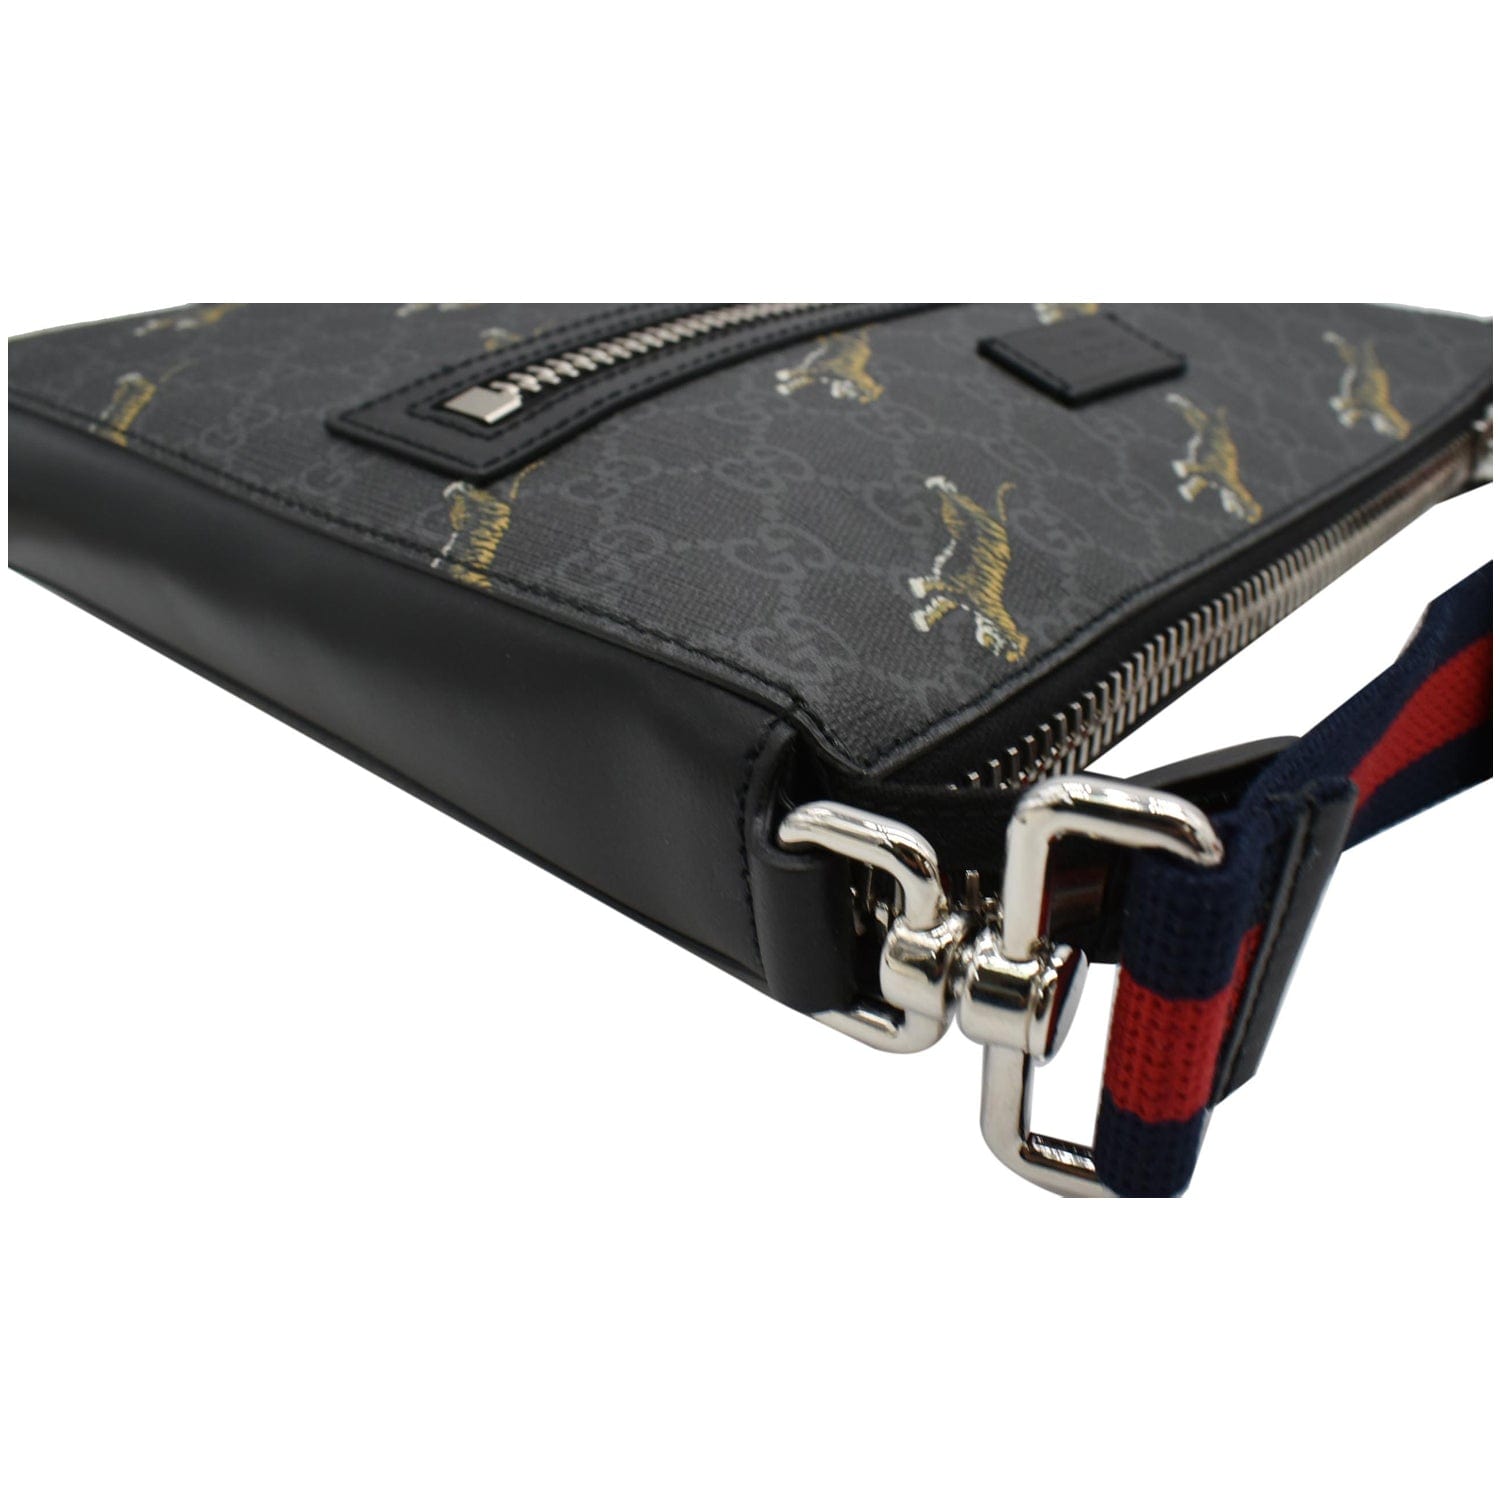 Gucci Bestiary Messenger With Tigers for Men